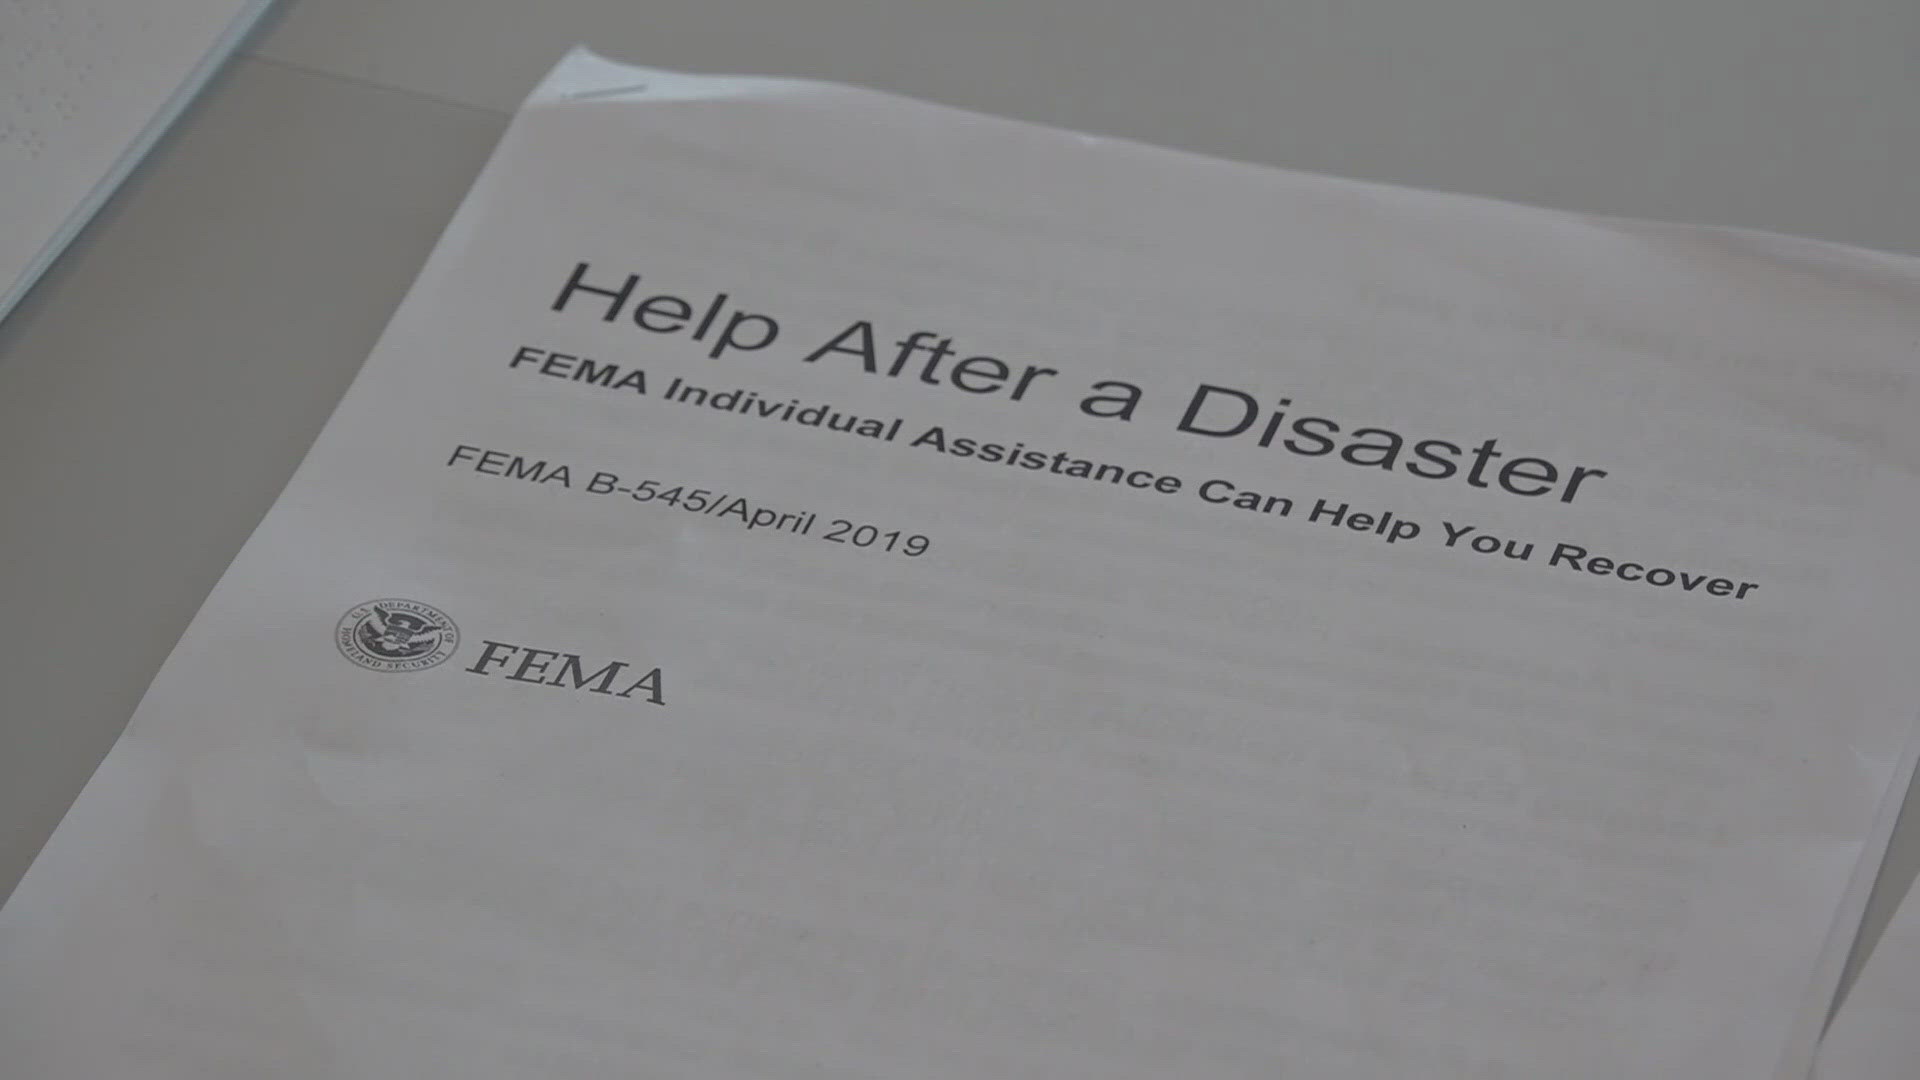 In Bell County alone, FEMA approved about $4.5 million in grant money to help roughly 1,900 households that have been affected by May's storms.